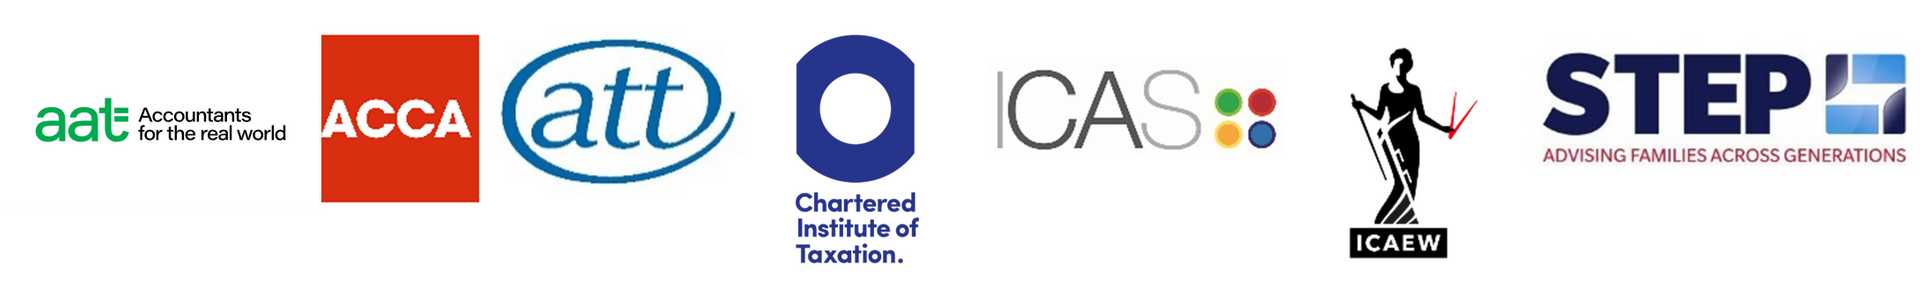 The logos of AAT, ACCA, ATT, CIOT, ICAS, ICAEW and STEP